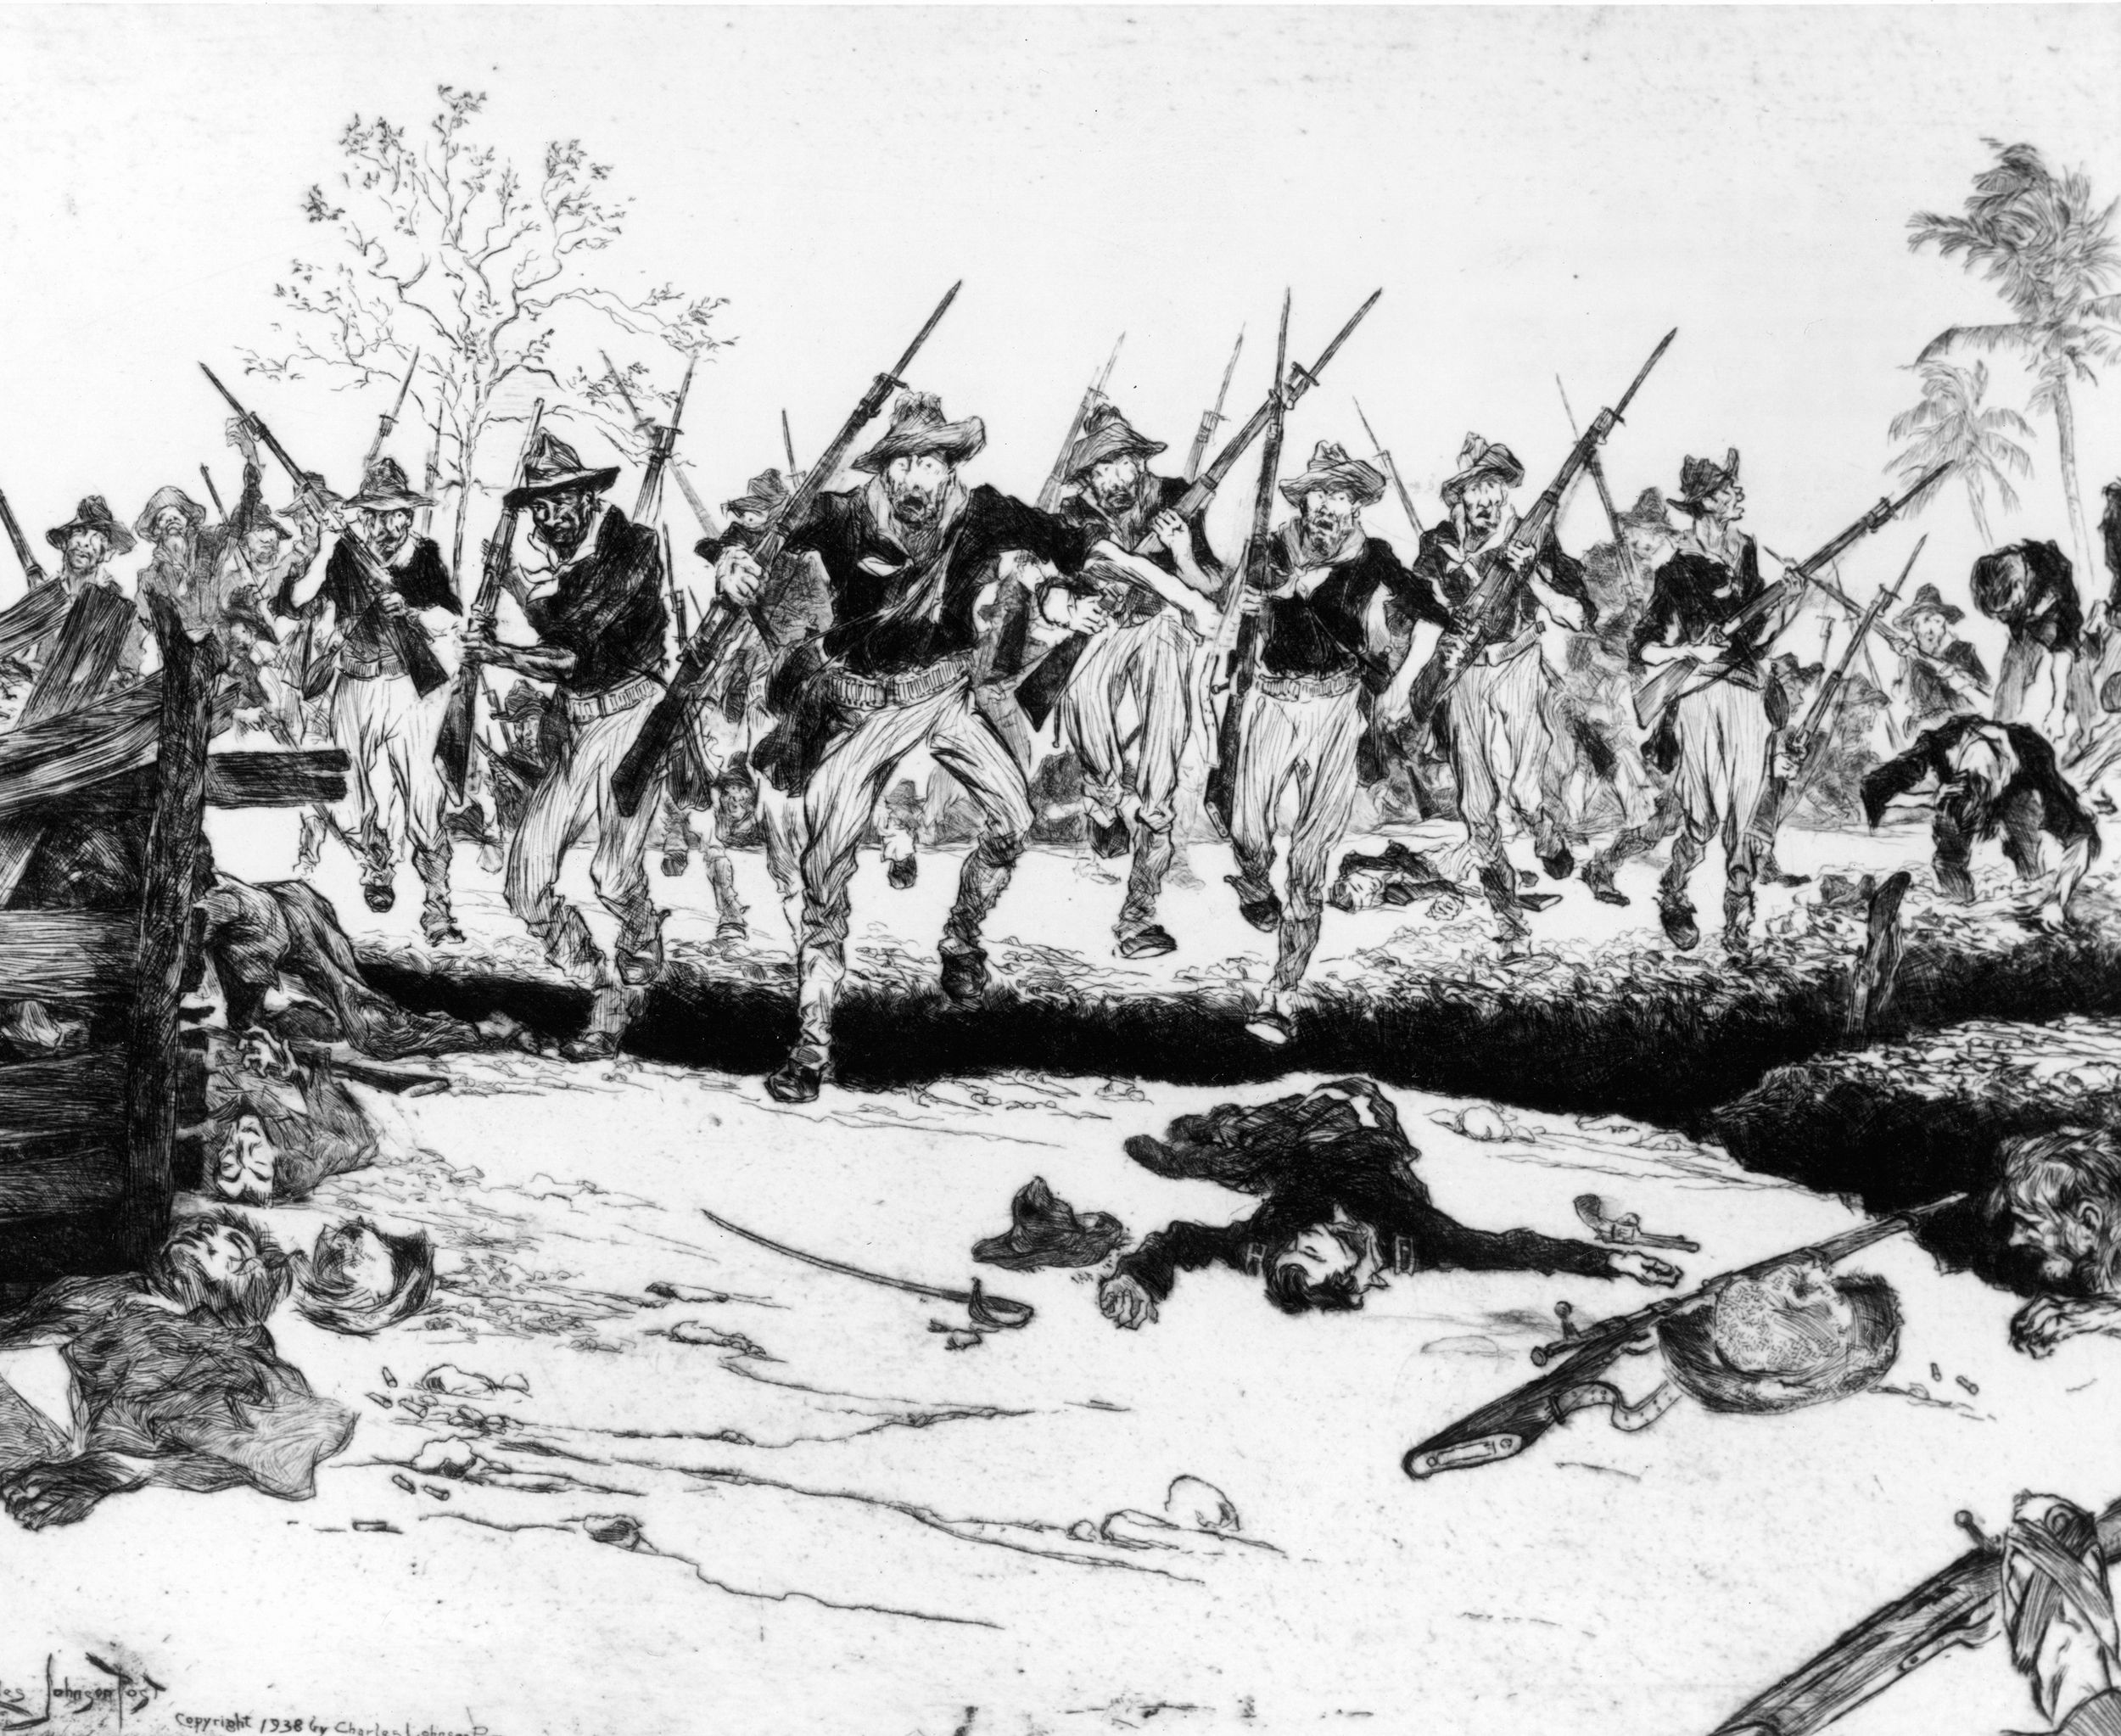 Lieutenant Jules Ord fell mortally wounded while leading the 71st Infantry up San Juan Hill. Drawing by Private Charles J. Post.